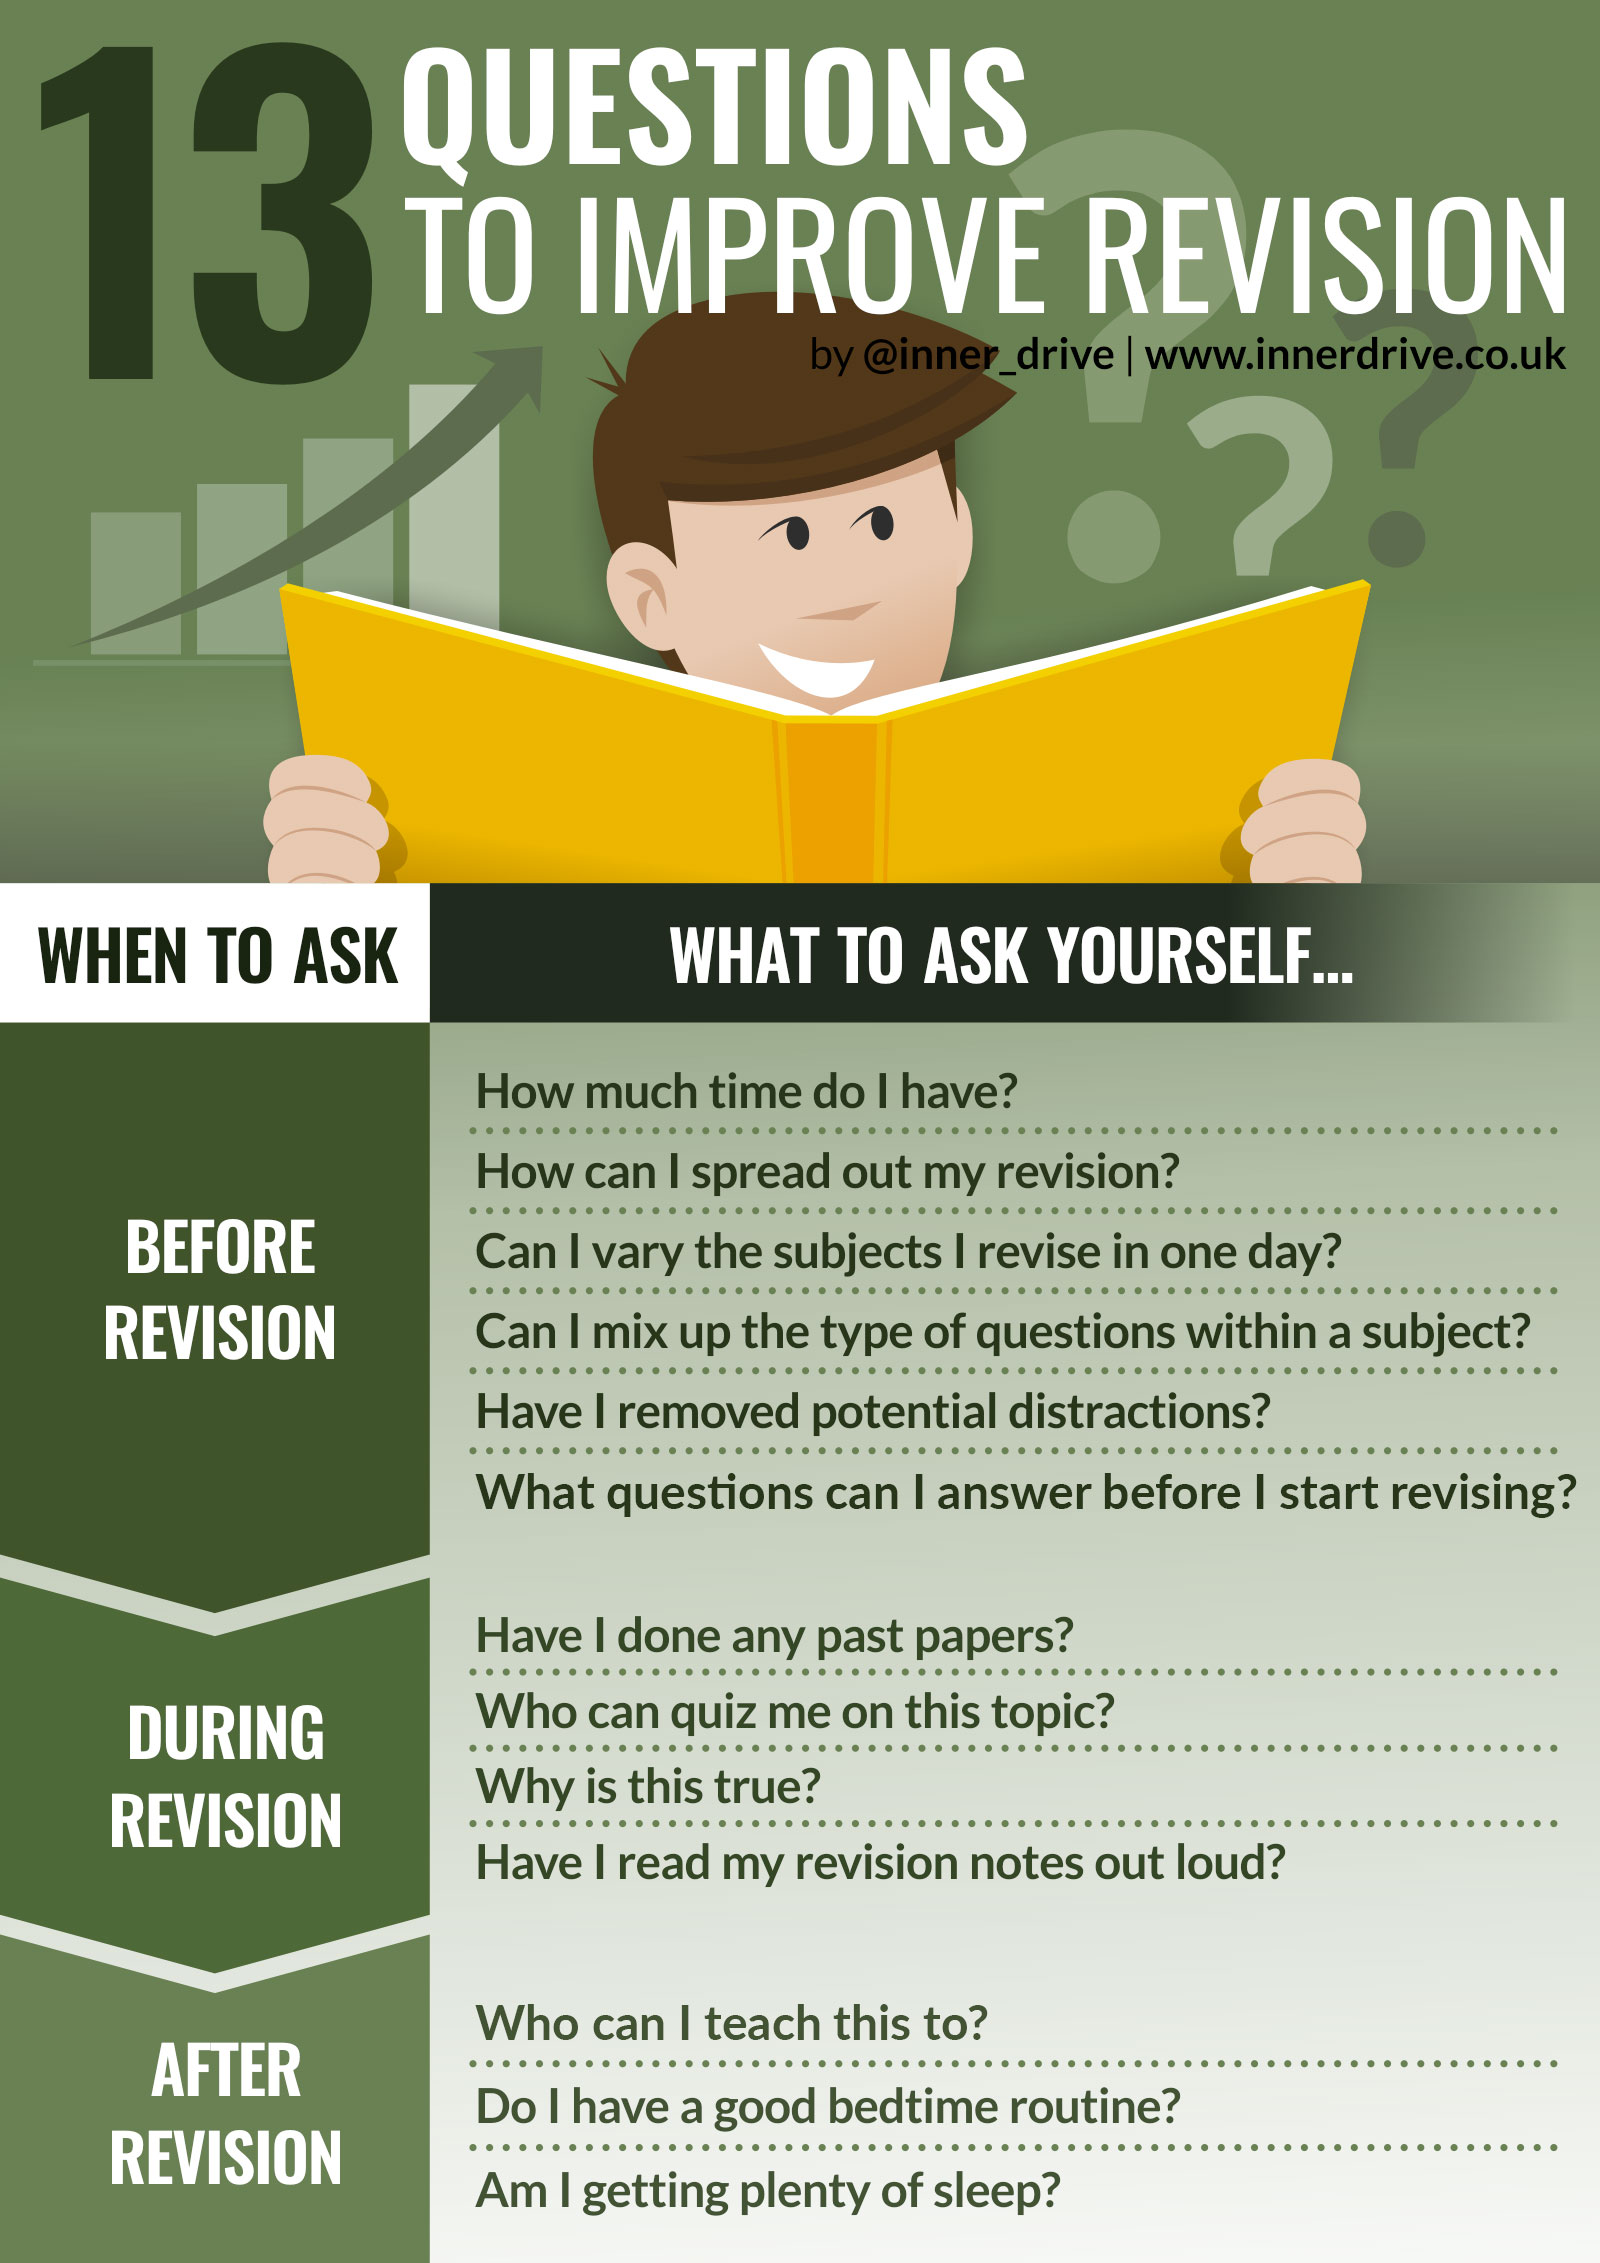 13-Questions-to-Improve-Revision